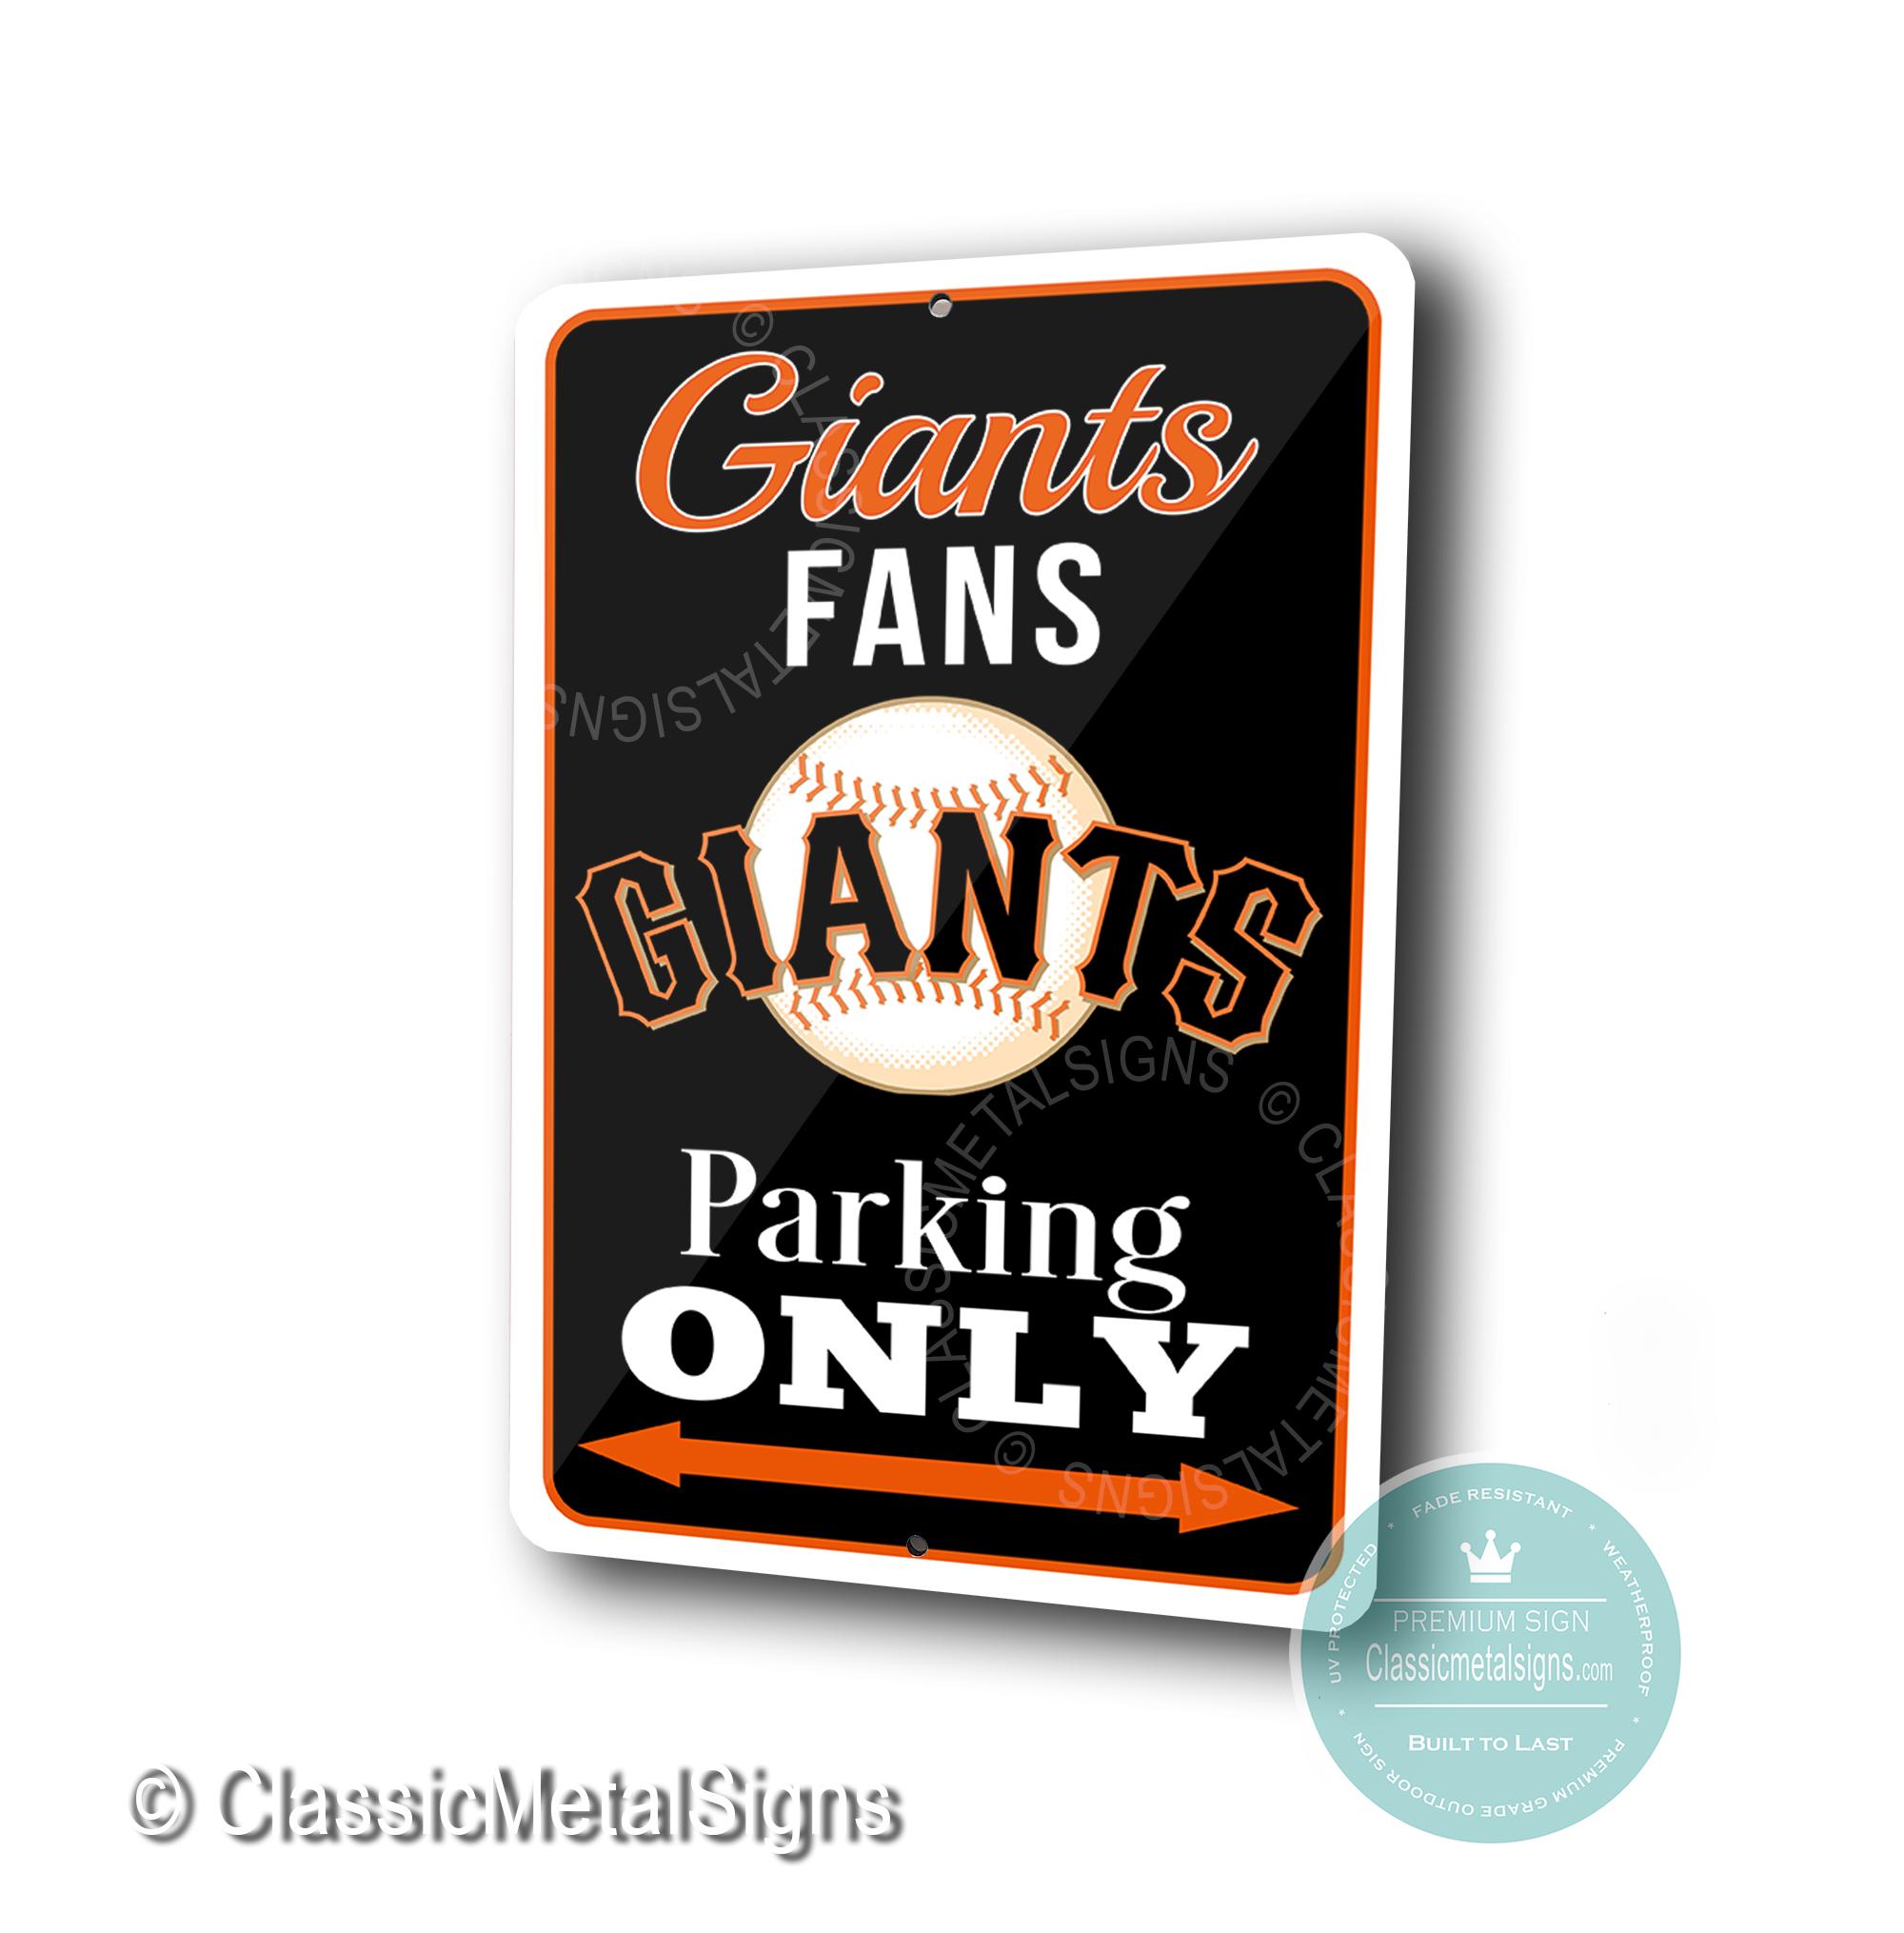 San Francisco Giants Parking Only Signs